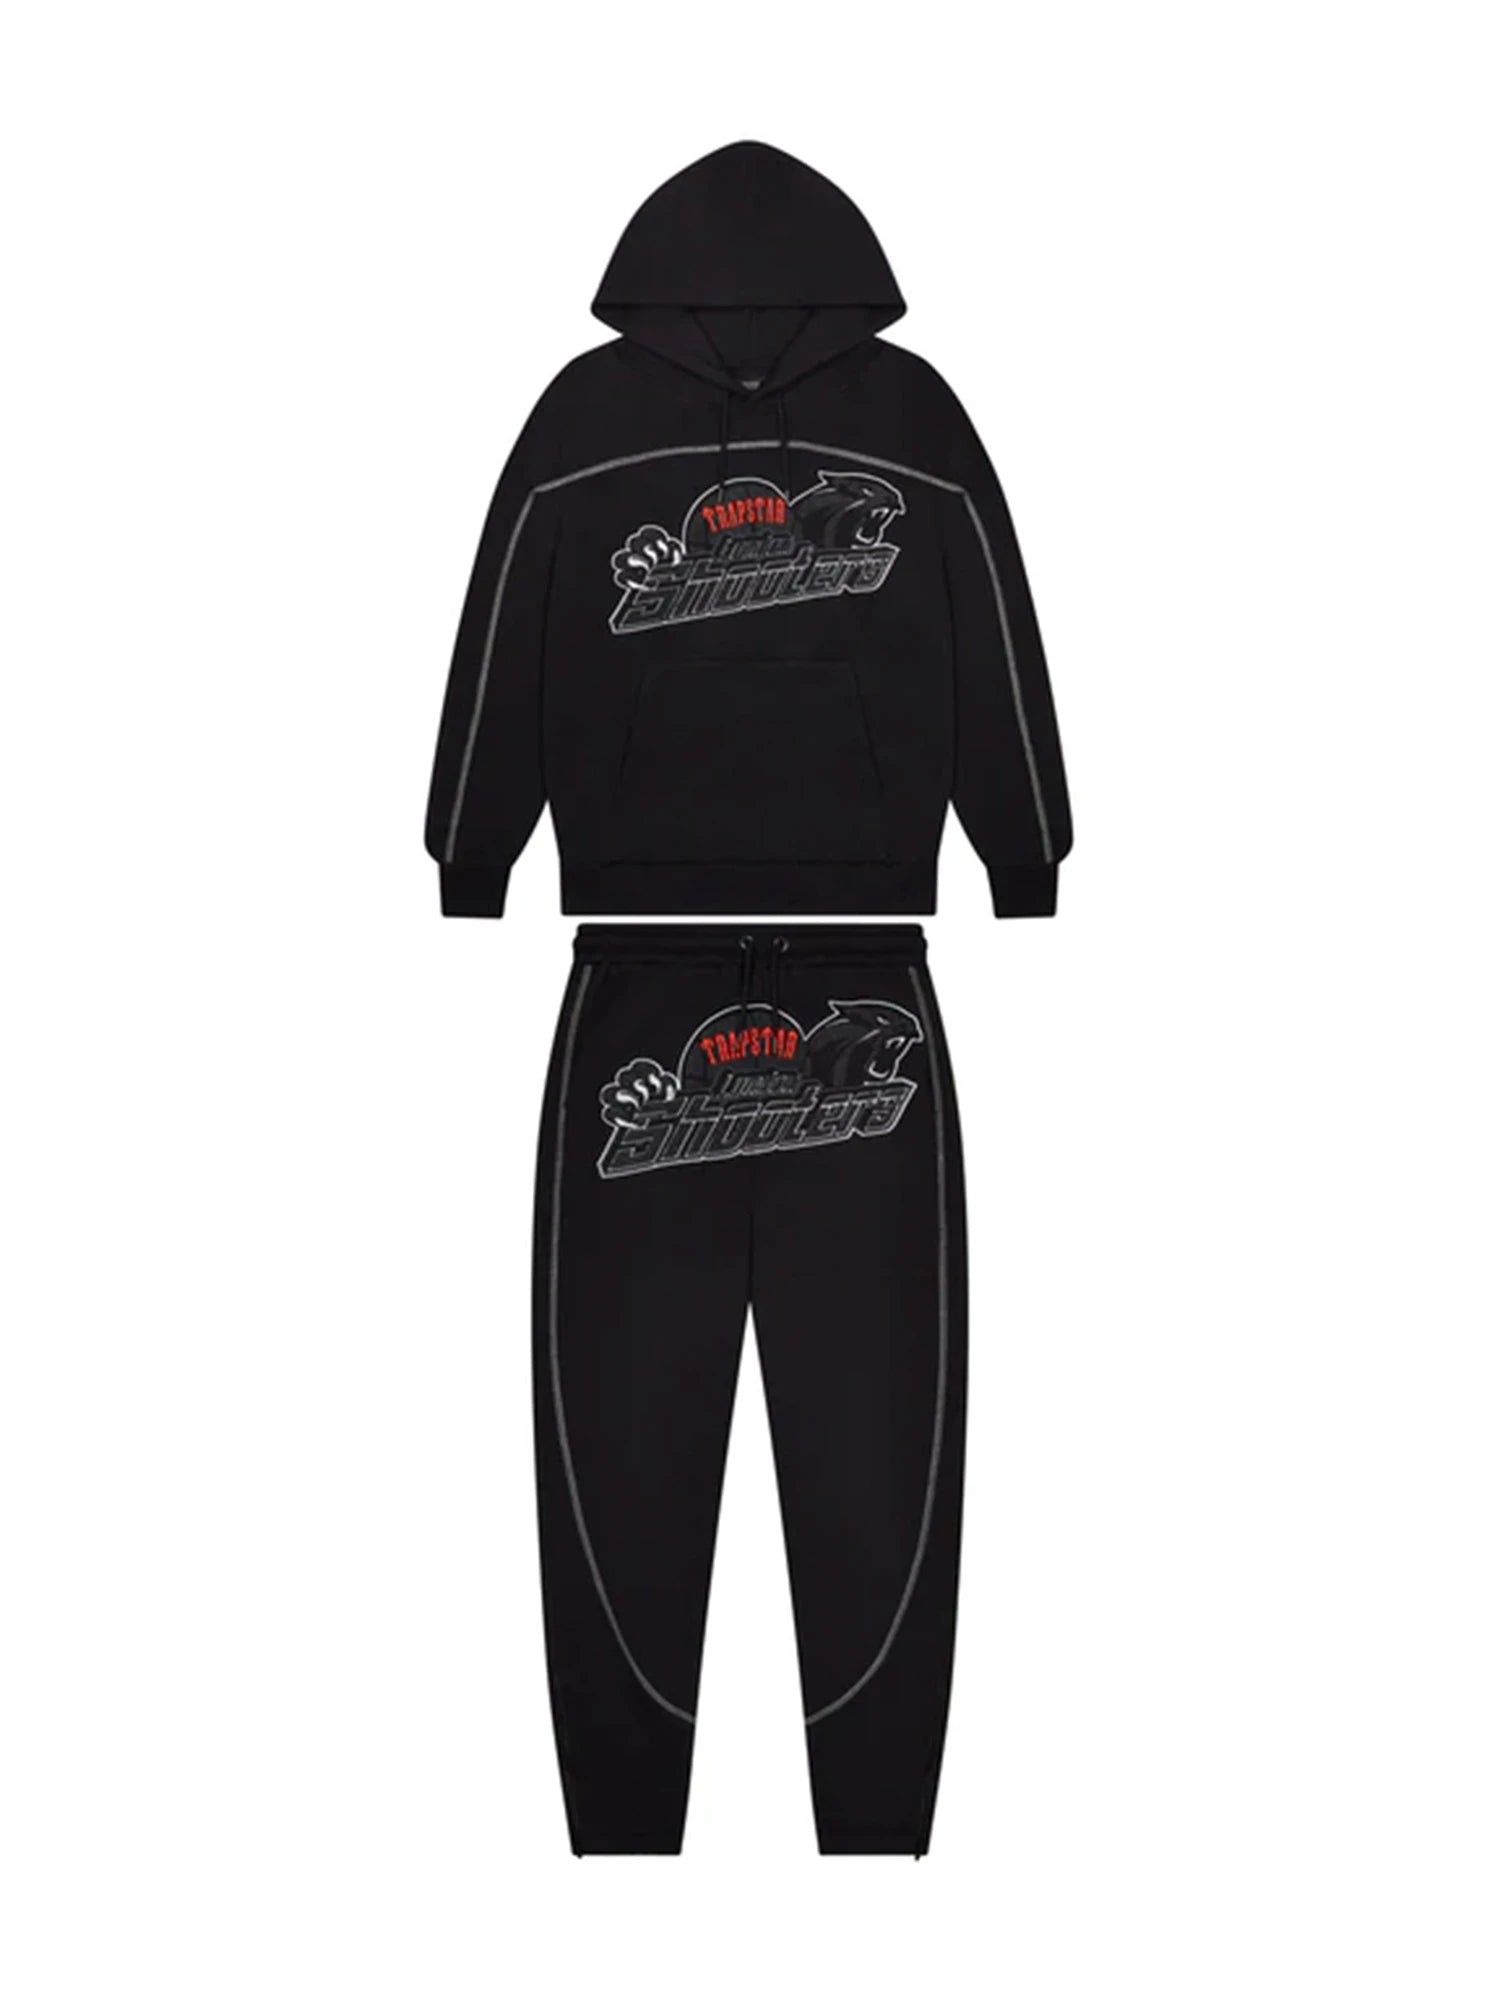 Trapstar Arch Shooters Tracksuit Black/Red